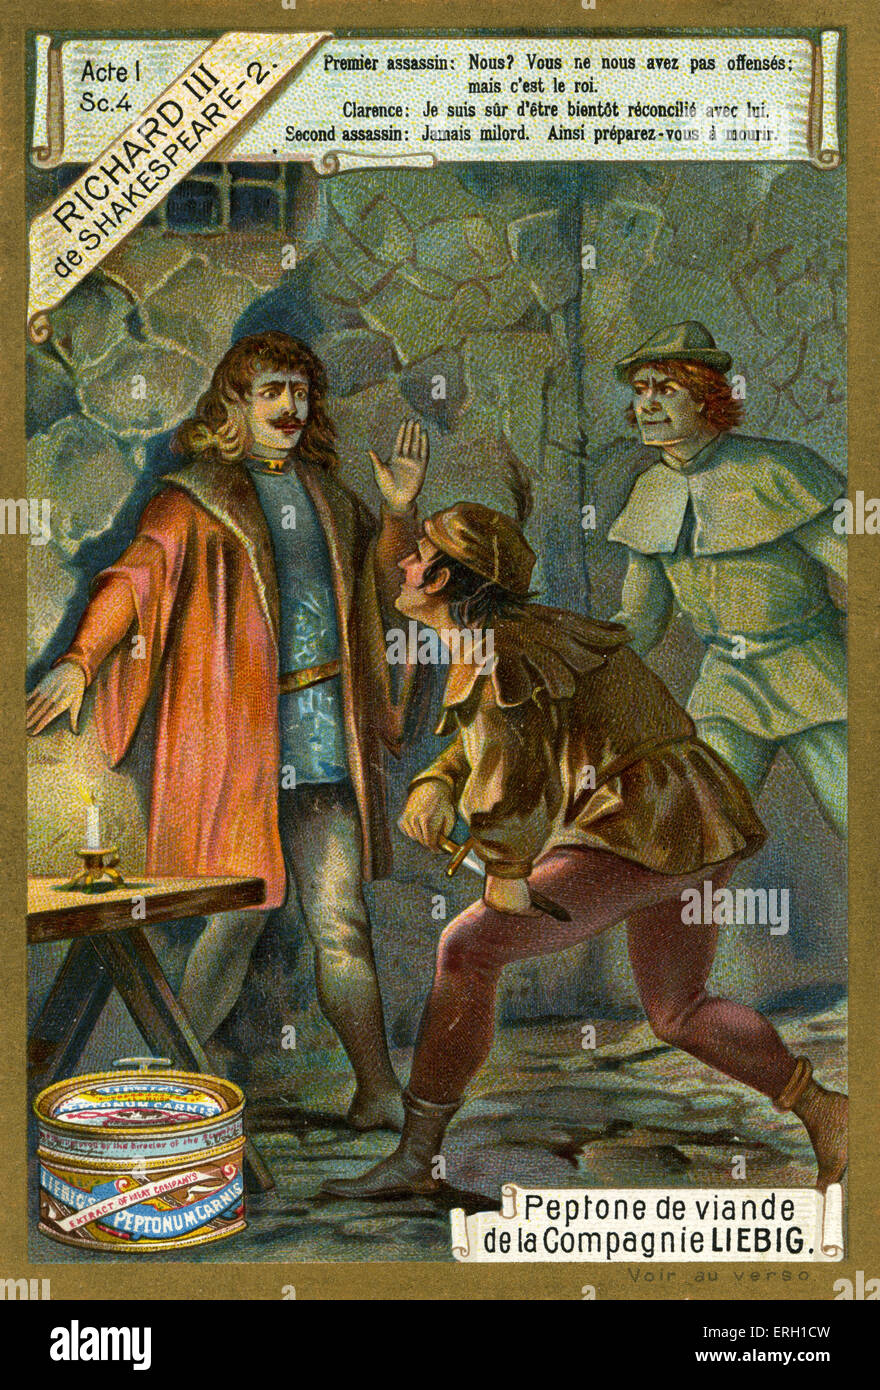 Richard III by William Shakespeare.  Act I. Scene 4 by William Shakespeare.  Clarence comes face to face with the first and Stock Photo